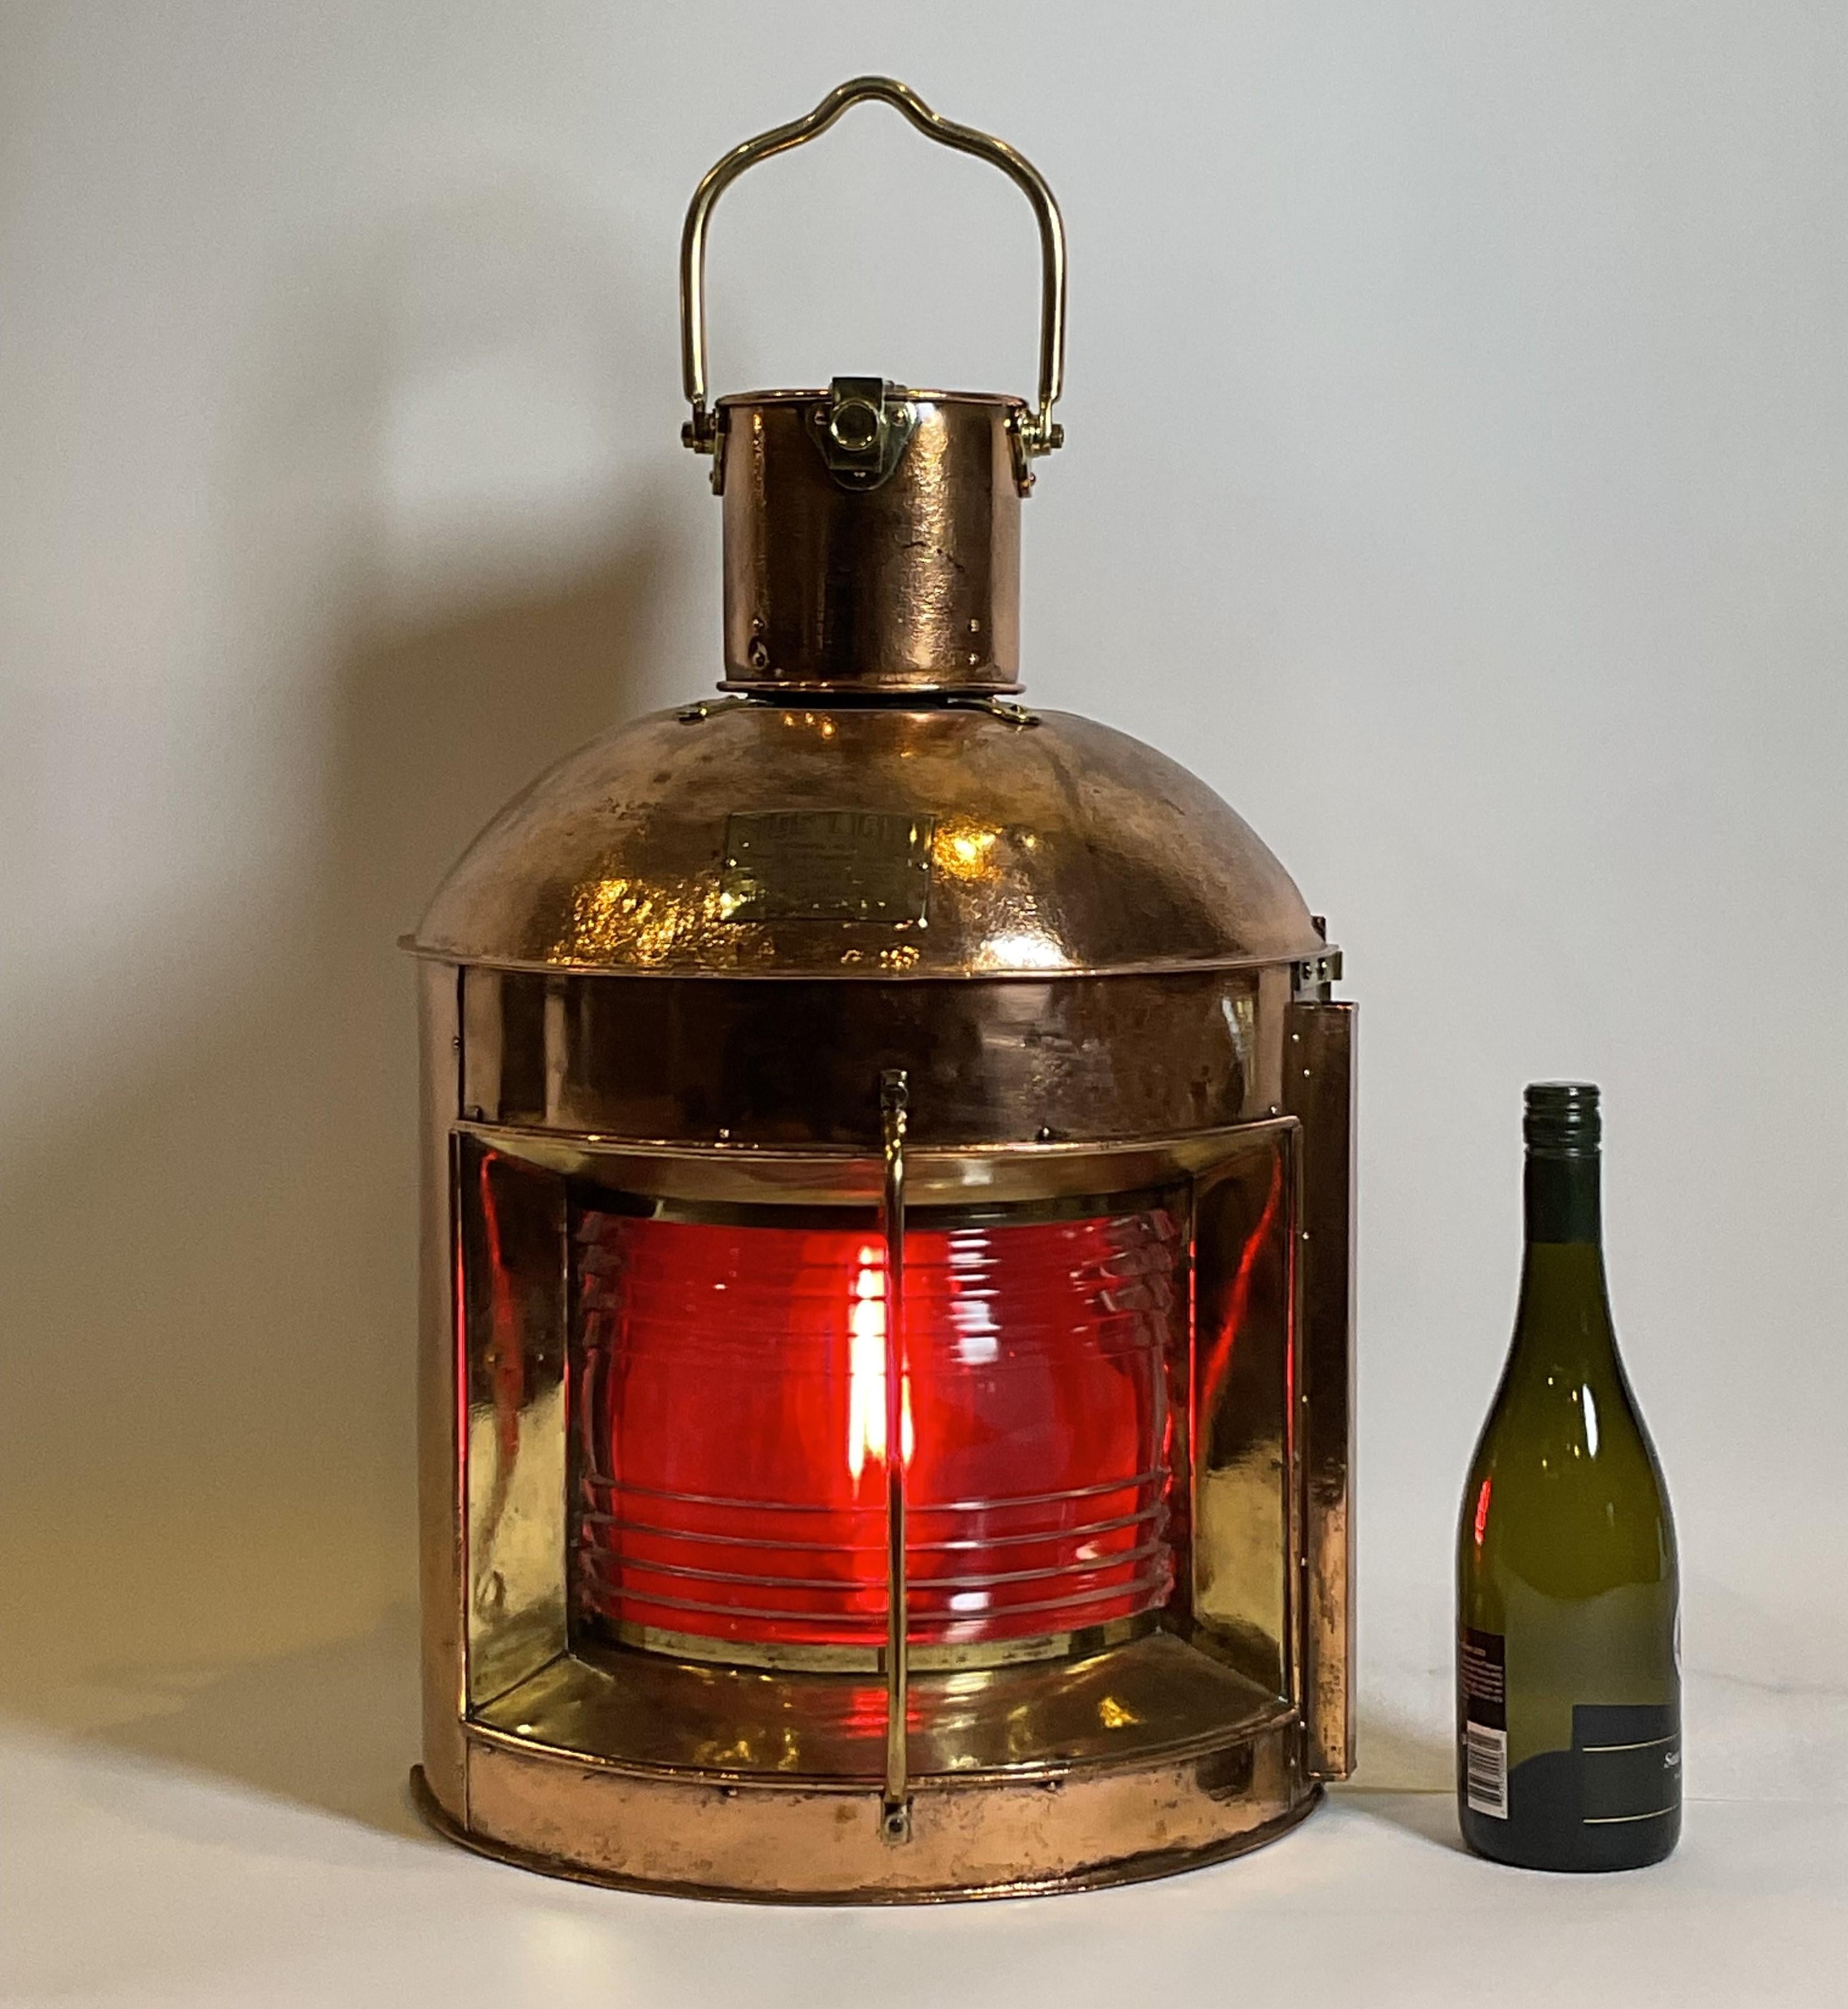 Highly polished ships side light port lantern. Copper case with heavy brass handles, hinges, lens bezel and protective bar. Very large in size and quite heavy. Clear fresnel glass lens with removable red filter. Quality nautical antique.

Weight: 21